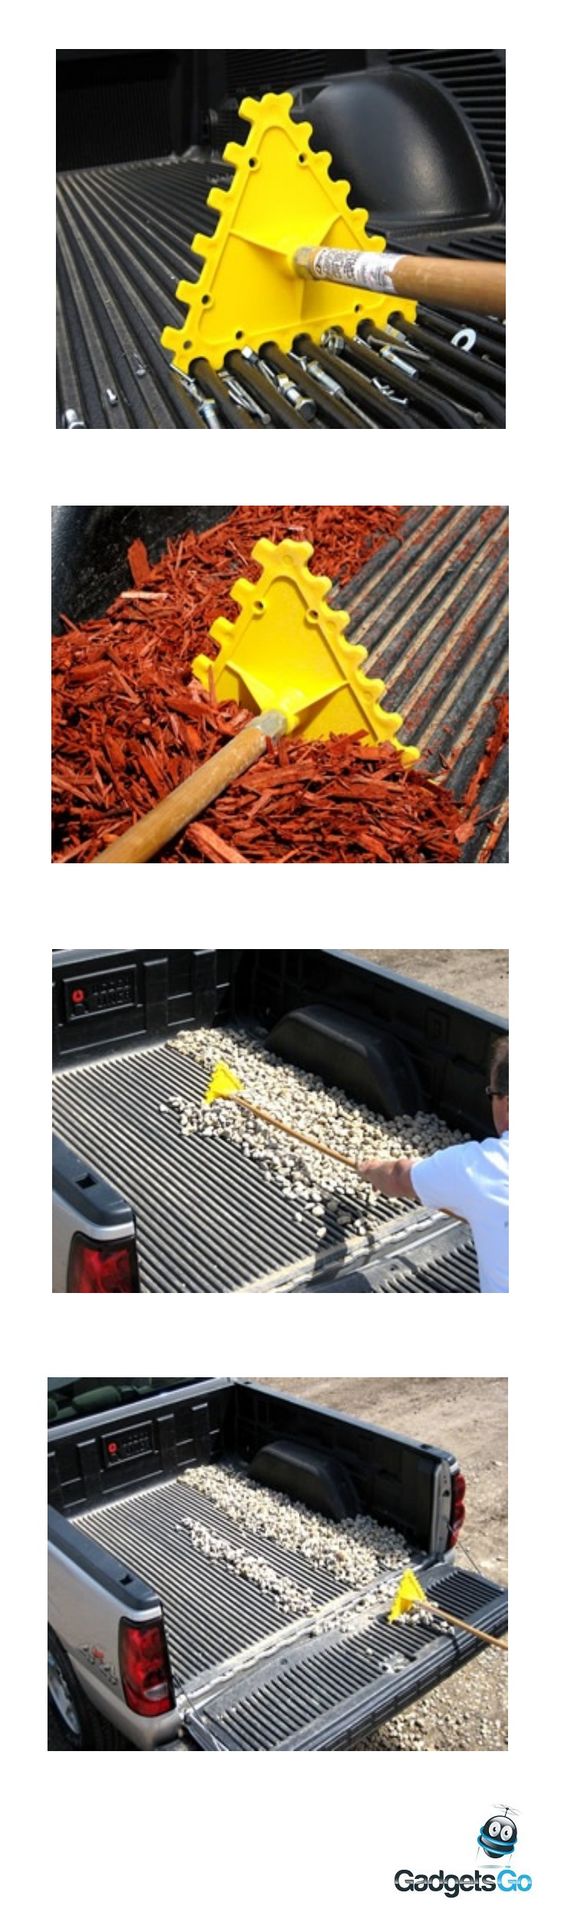 Do you know how to clean your pickup truck bed in the easiest way possible? Just use the Universal Truck Bedliner Rake to remove dirt in just one stroke. It works better than hoses and brooms! #clean #cargadgets